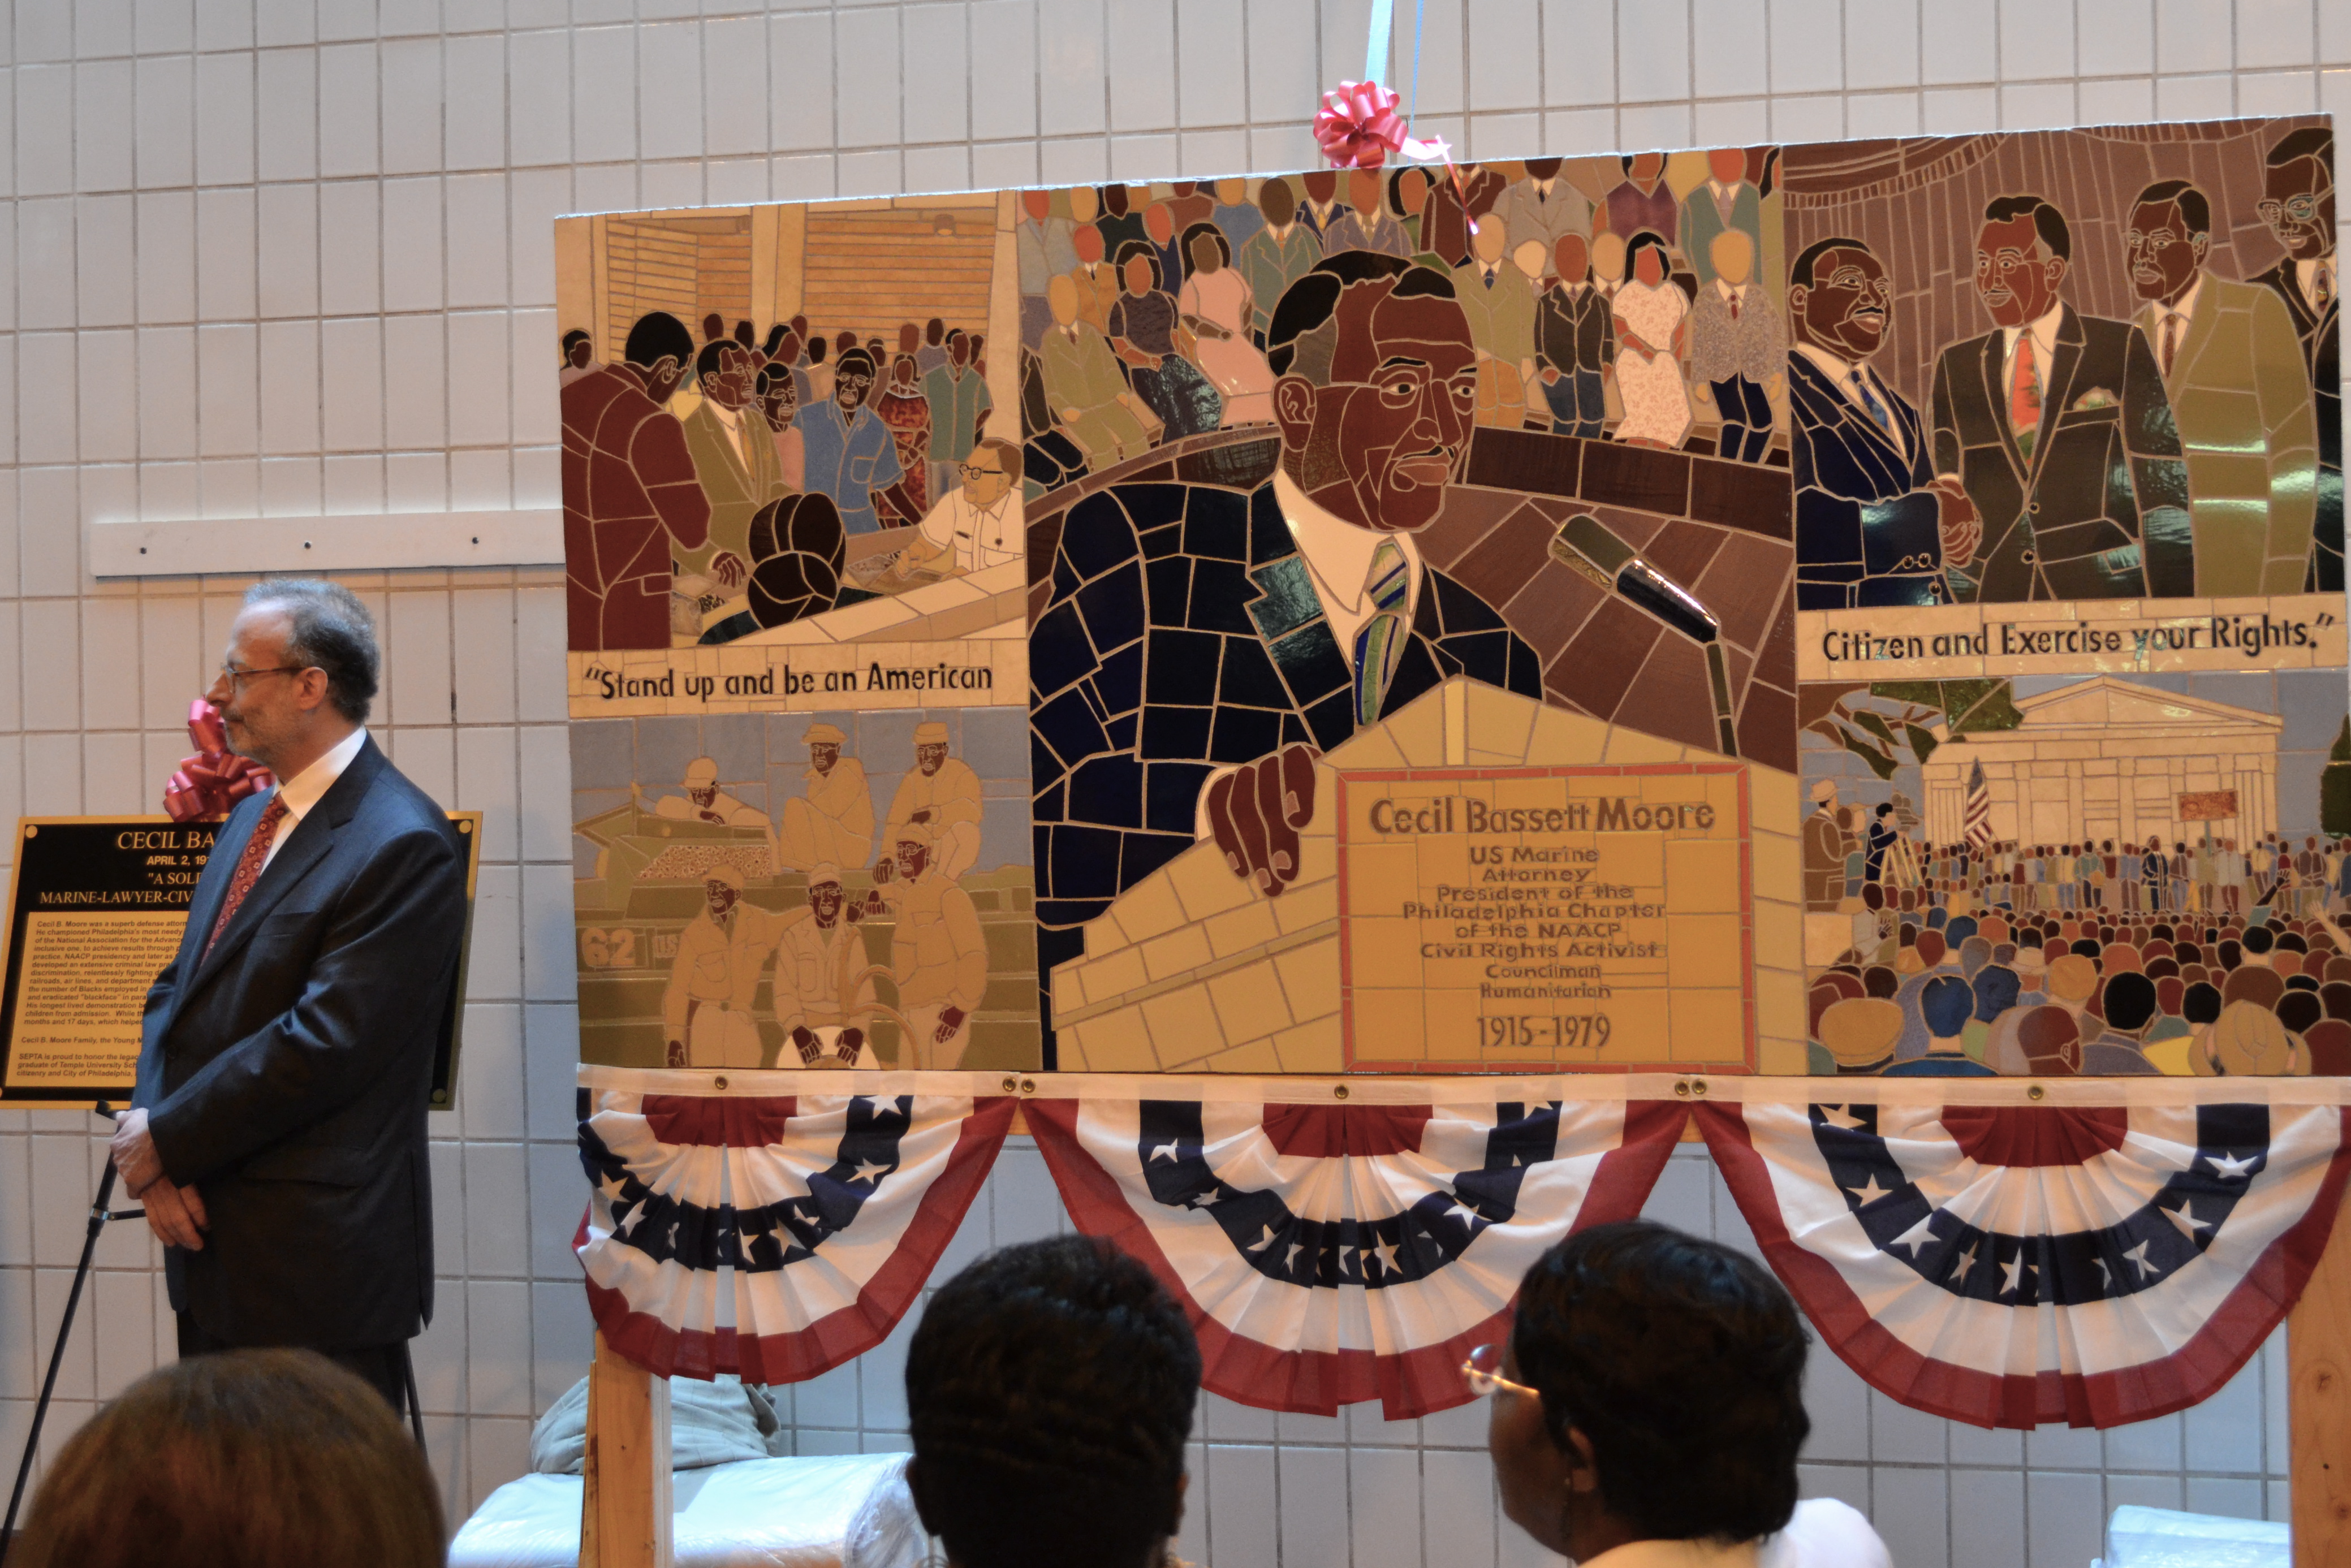 Local artist Jonathan Mandell stood next to the mural he created during the ceremony